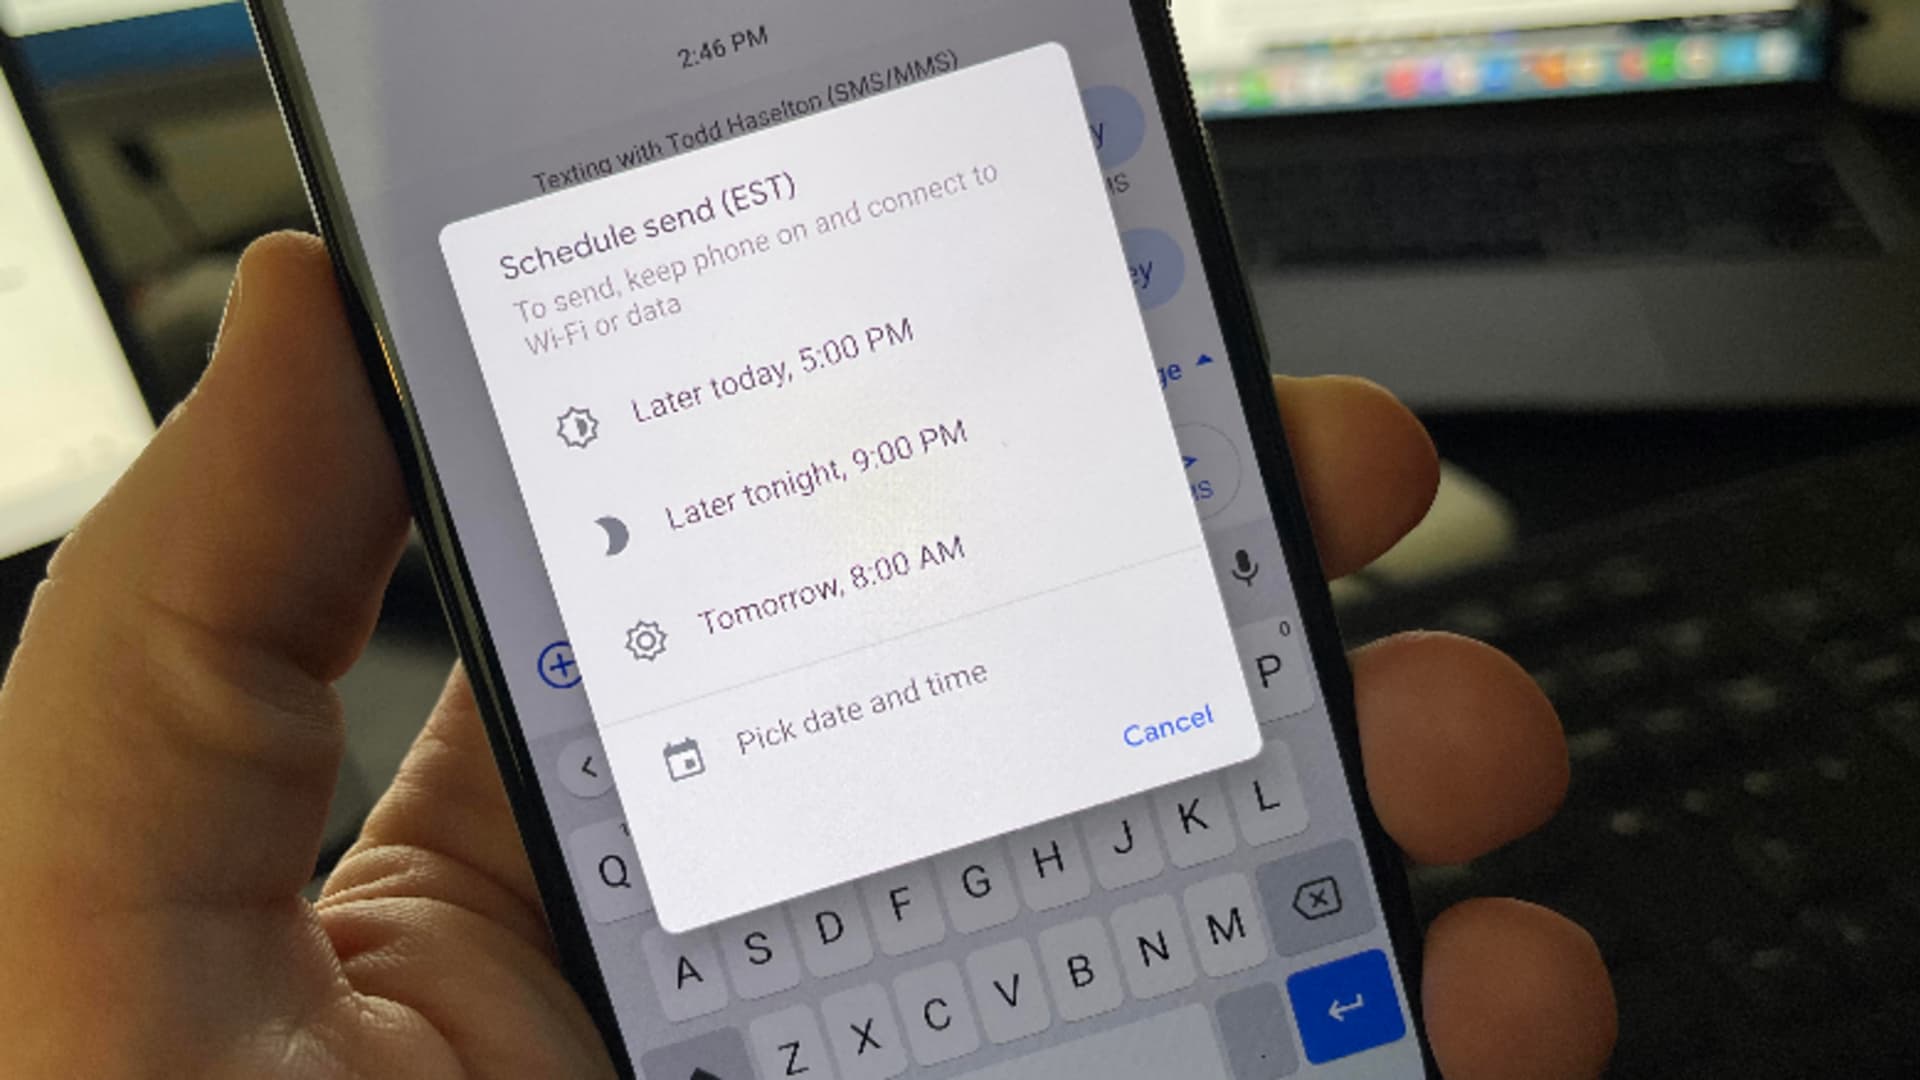 How to schedule text messages on Android